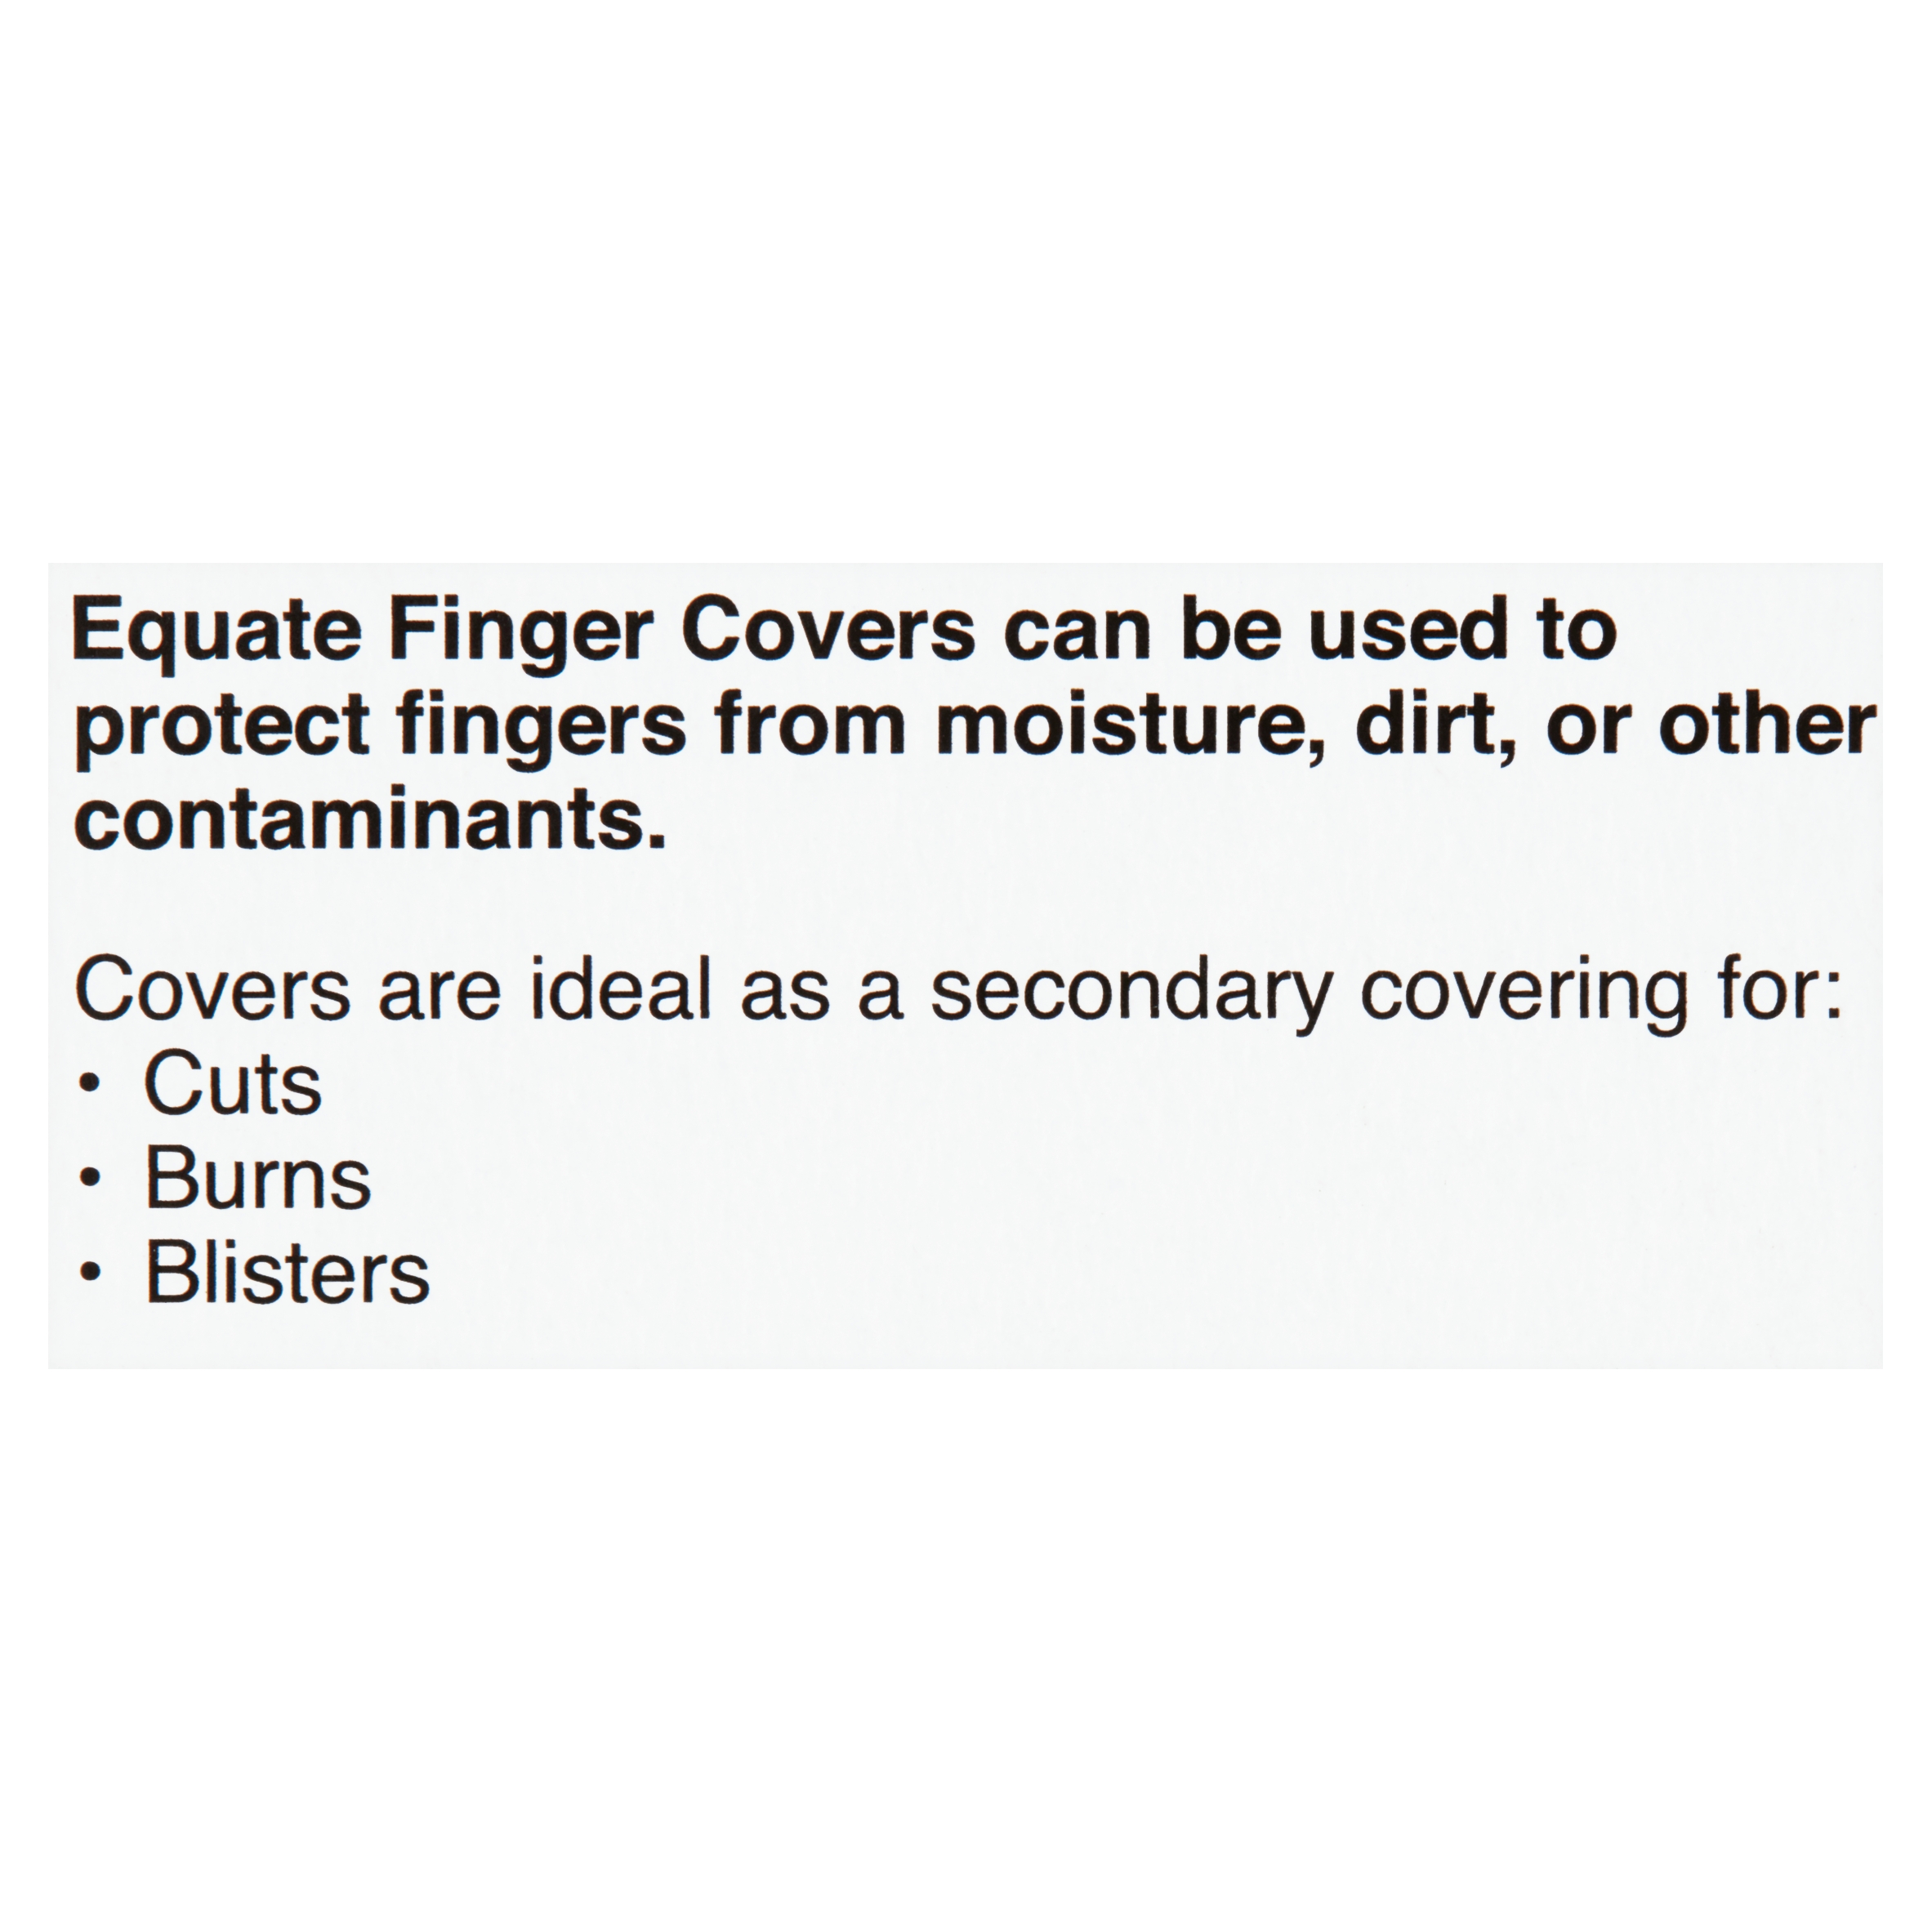 Equate Latex Finger Covers, 36 Count - image 5 of 8